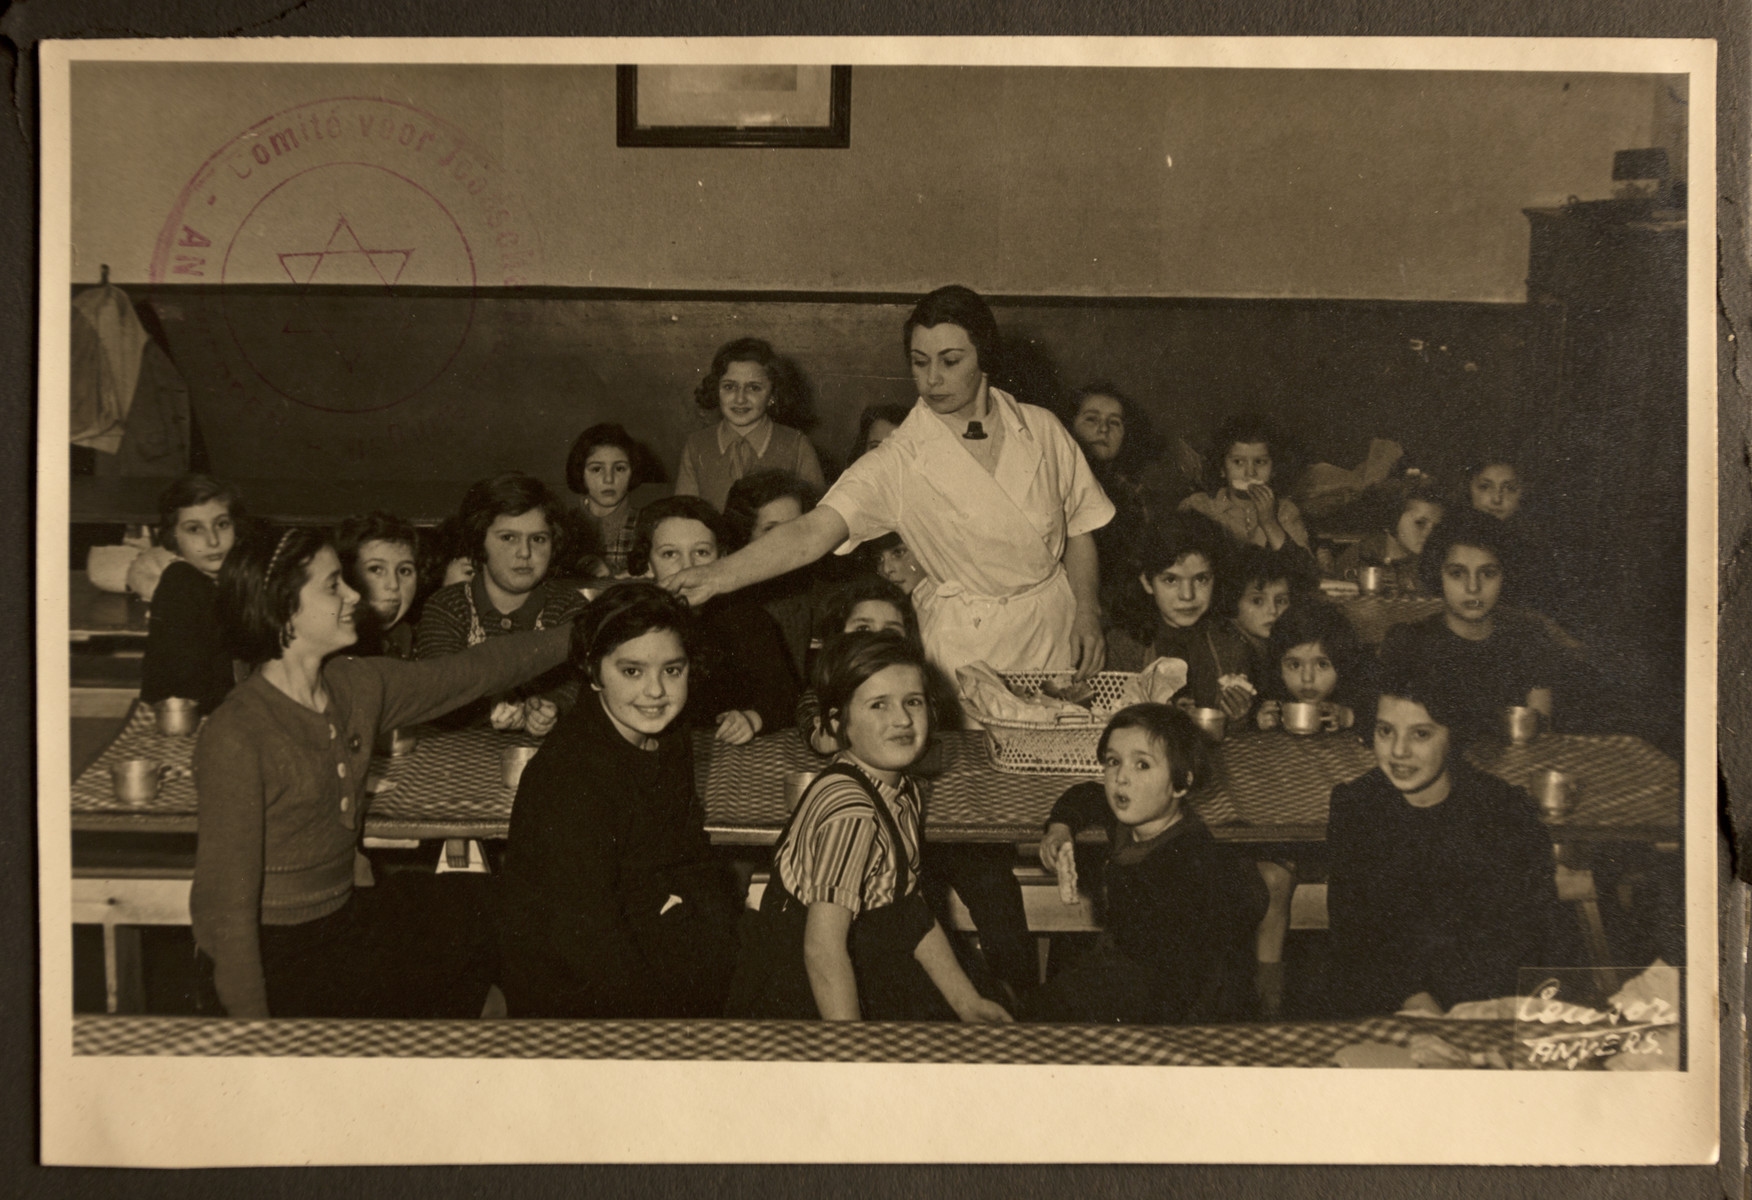 A woman serves refugee children in the dining room of the Jewish Refugee Aid Committee of Antwerp.